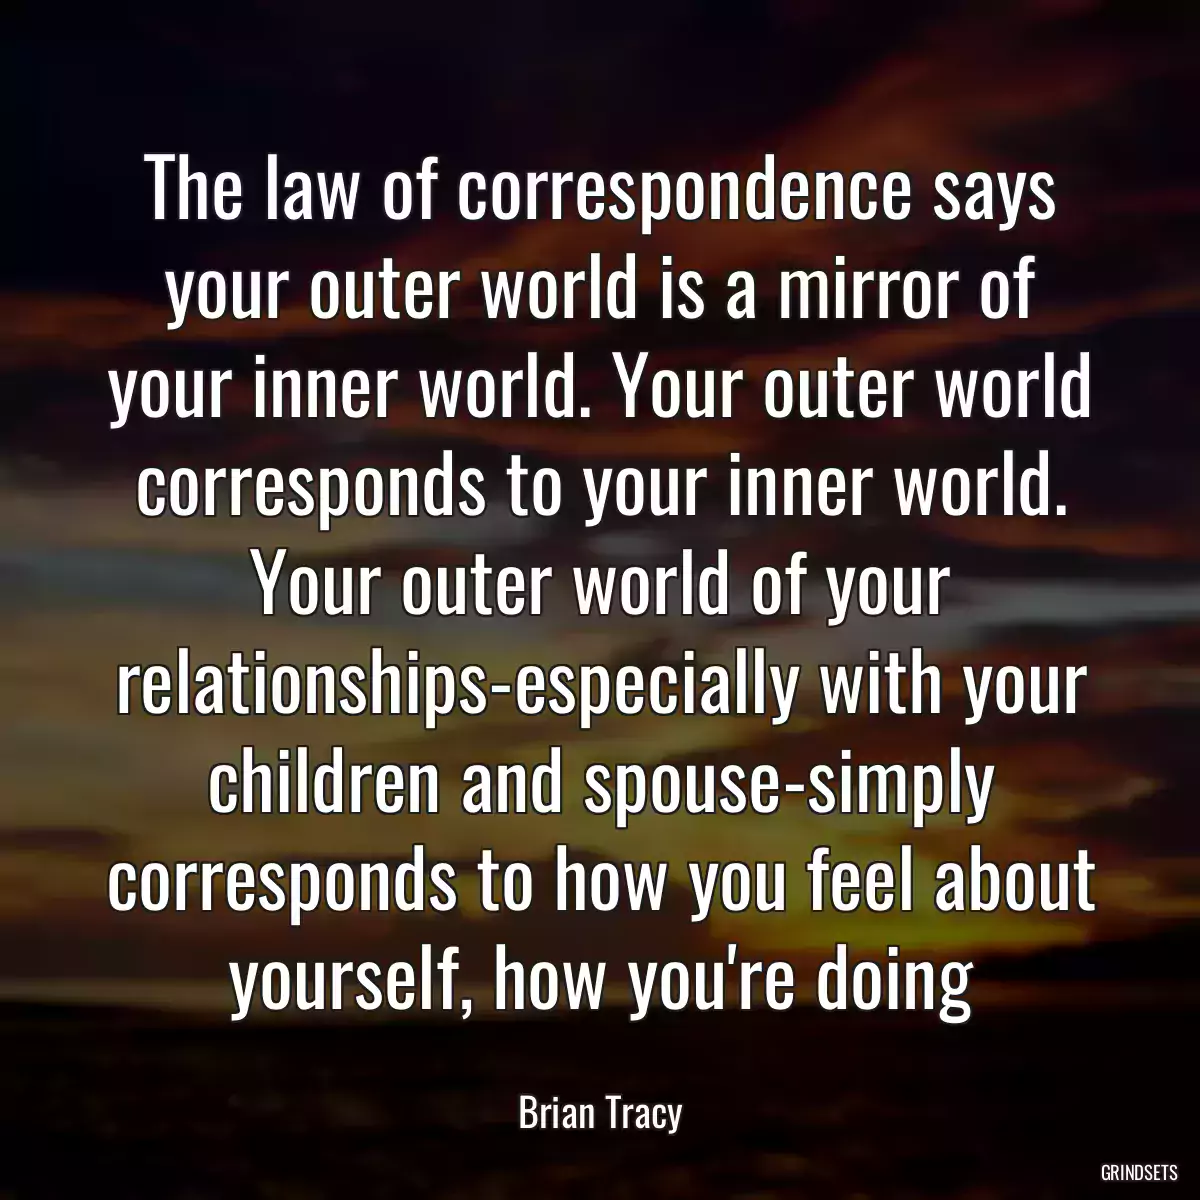 The law of correspondence says your outer world is a mirror of your inner world. Your outer world corresponds to your inner world. Your outer world of your relationships-especially with your children and spouse-simply corresponds to how you feel about yourself, how you\'re doing